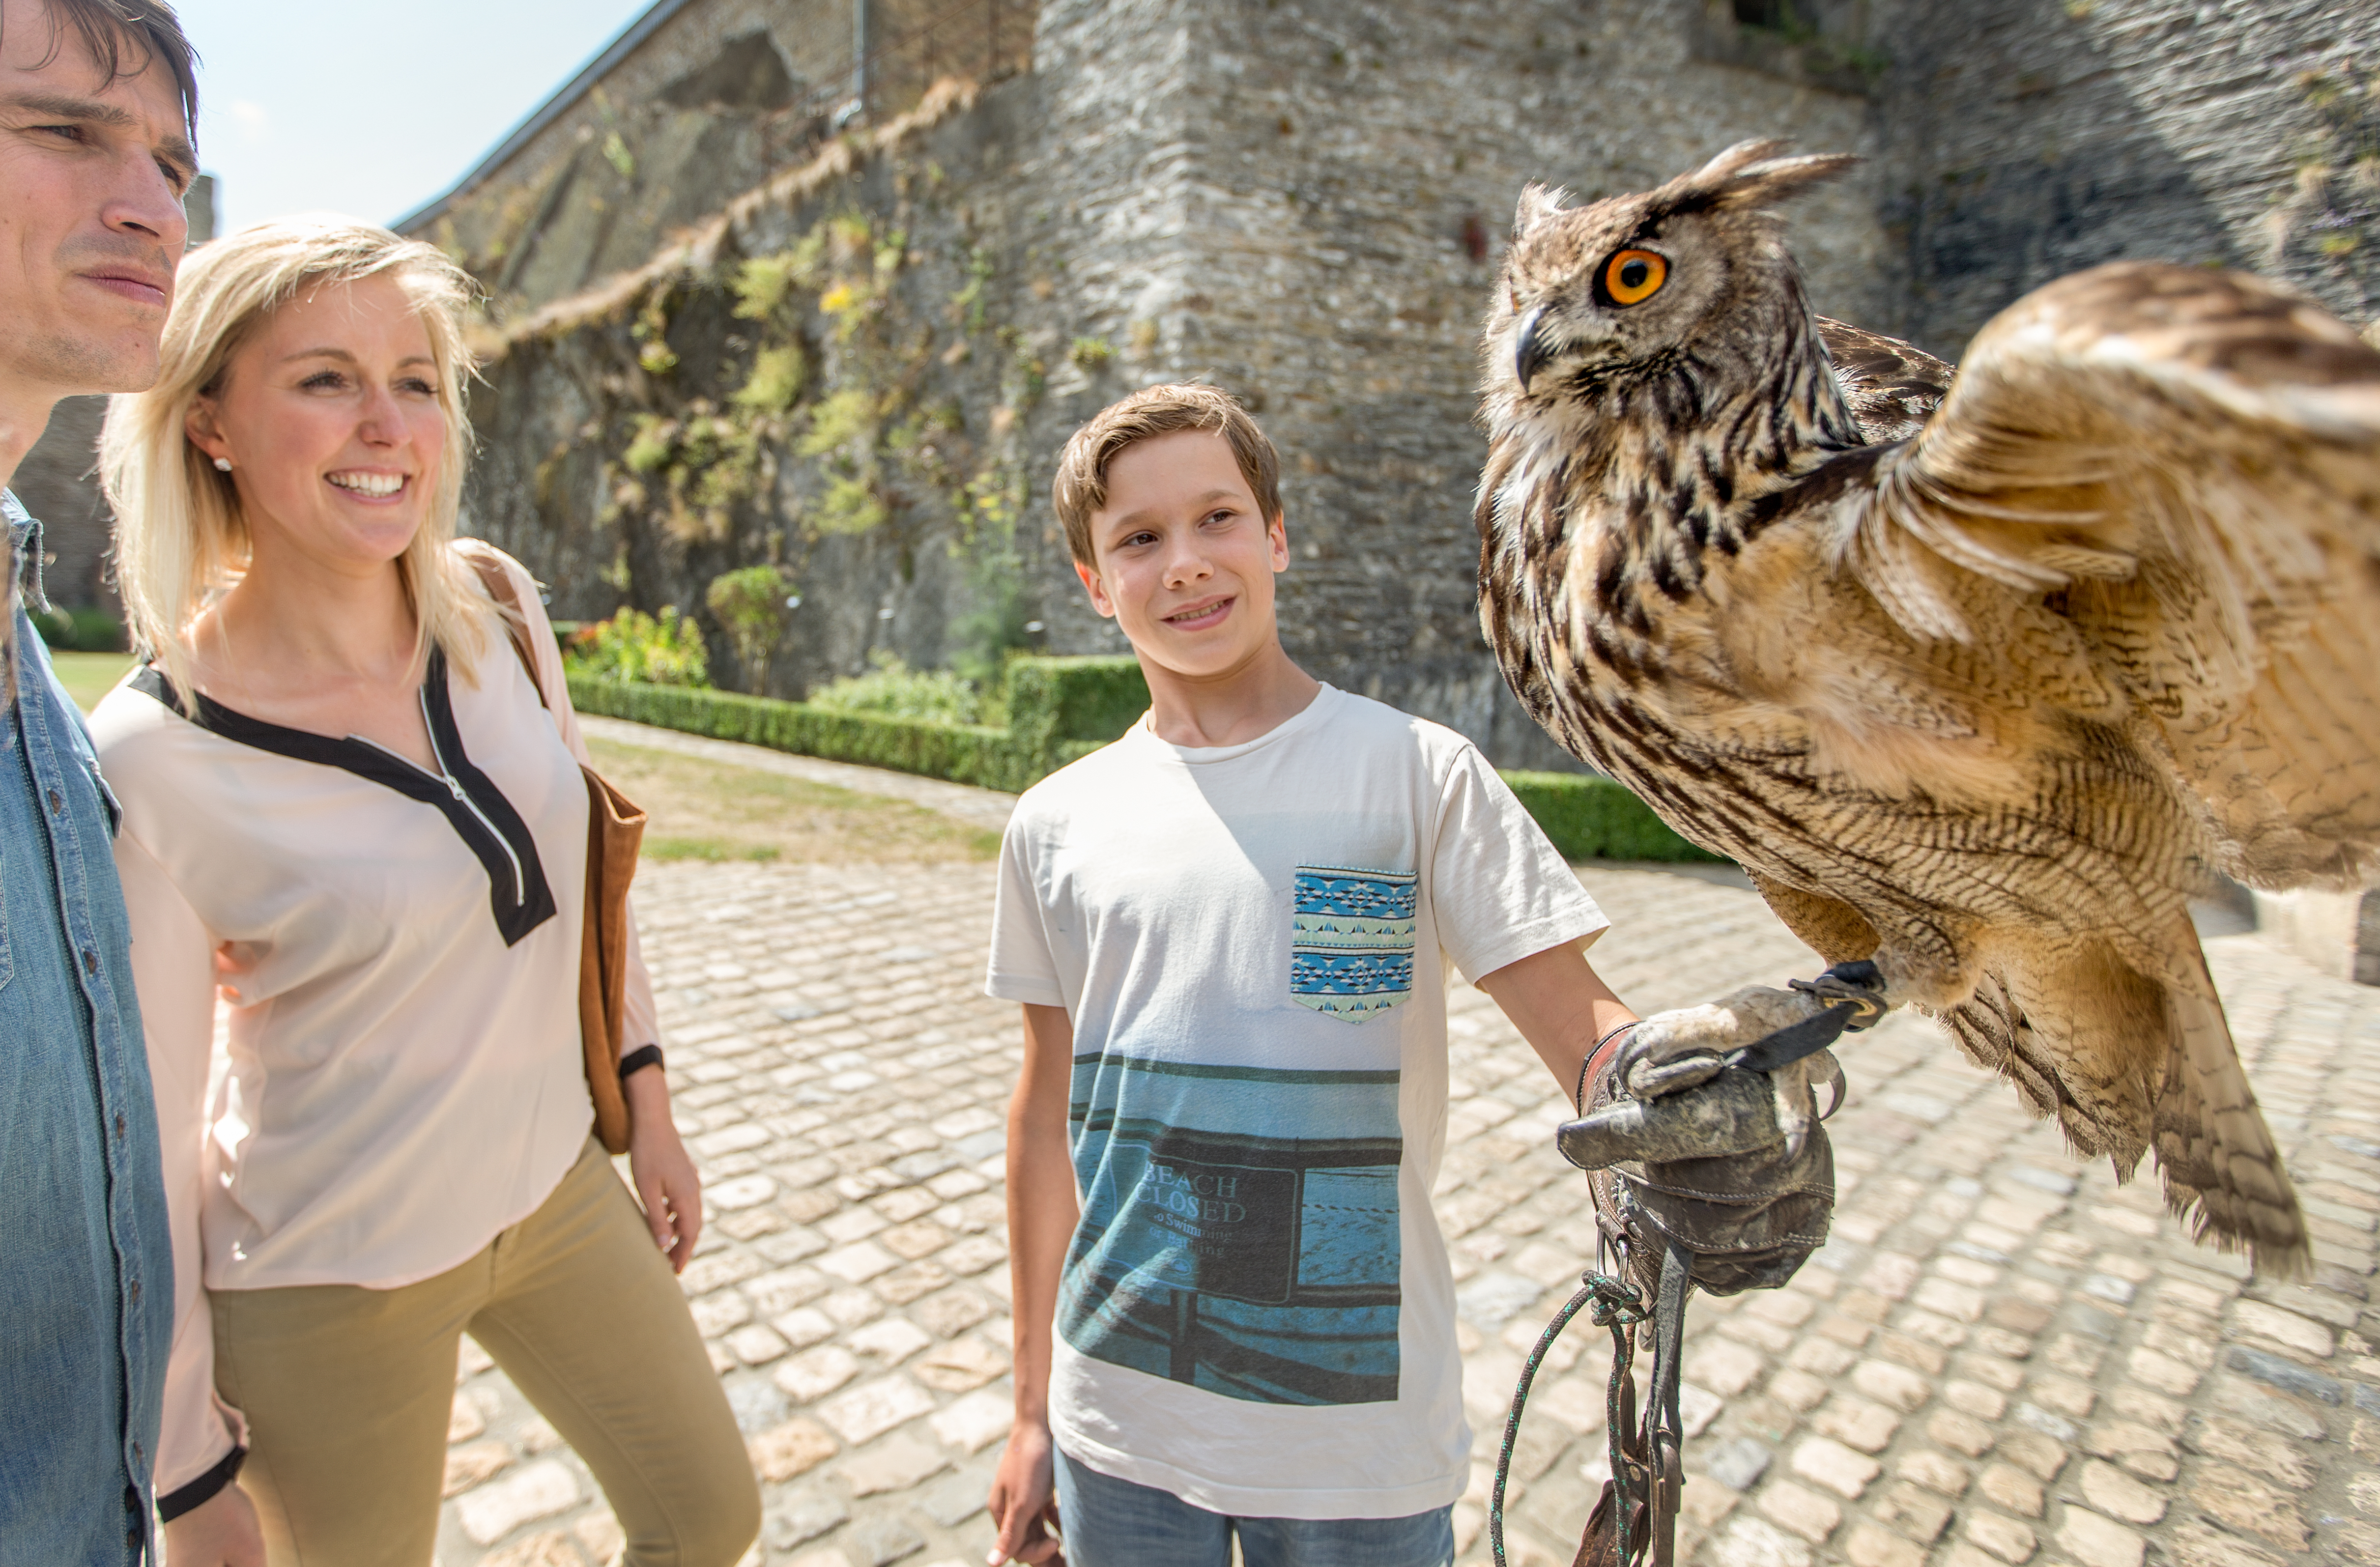 Watch a falconry demonstration at the Bouillon castle